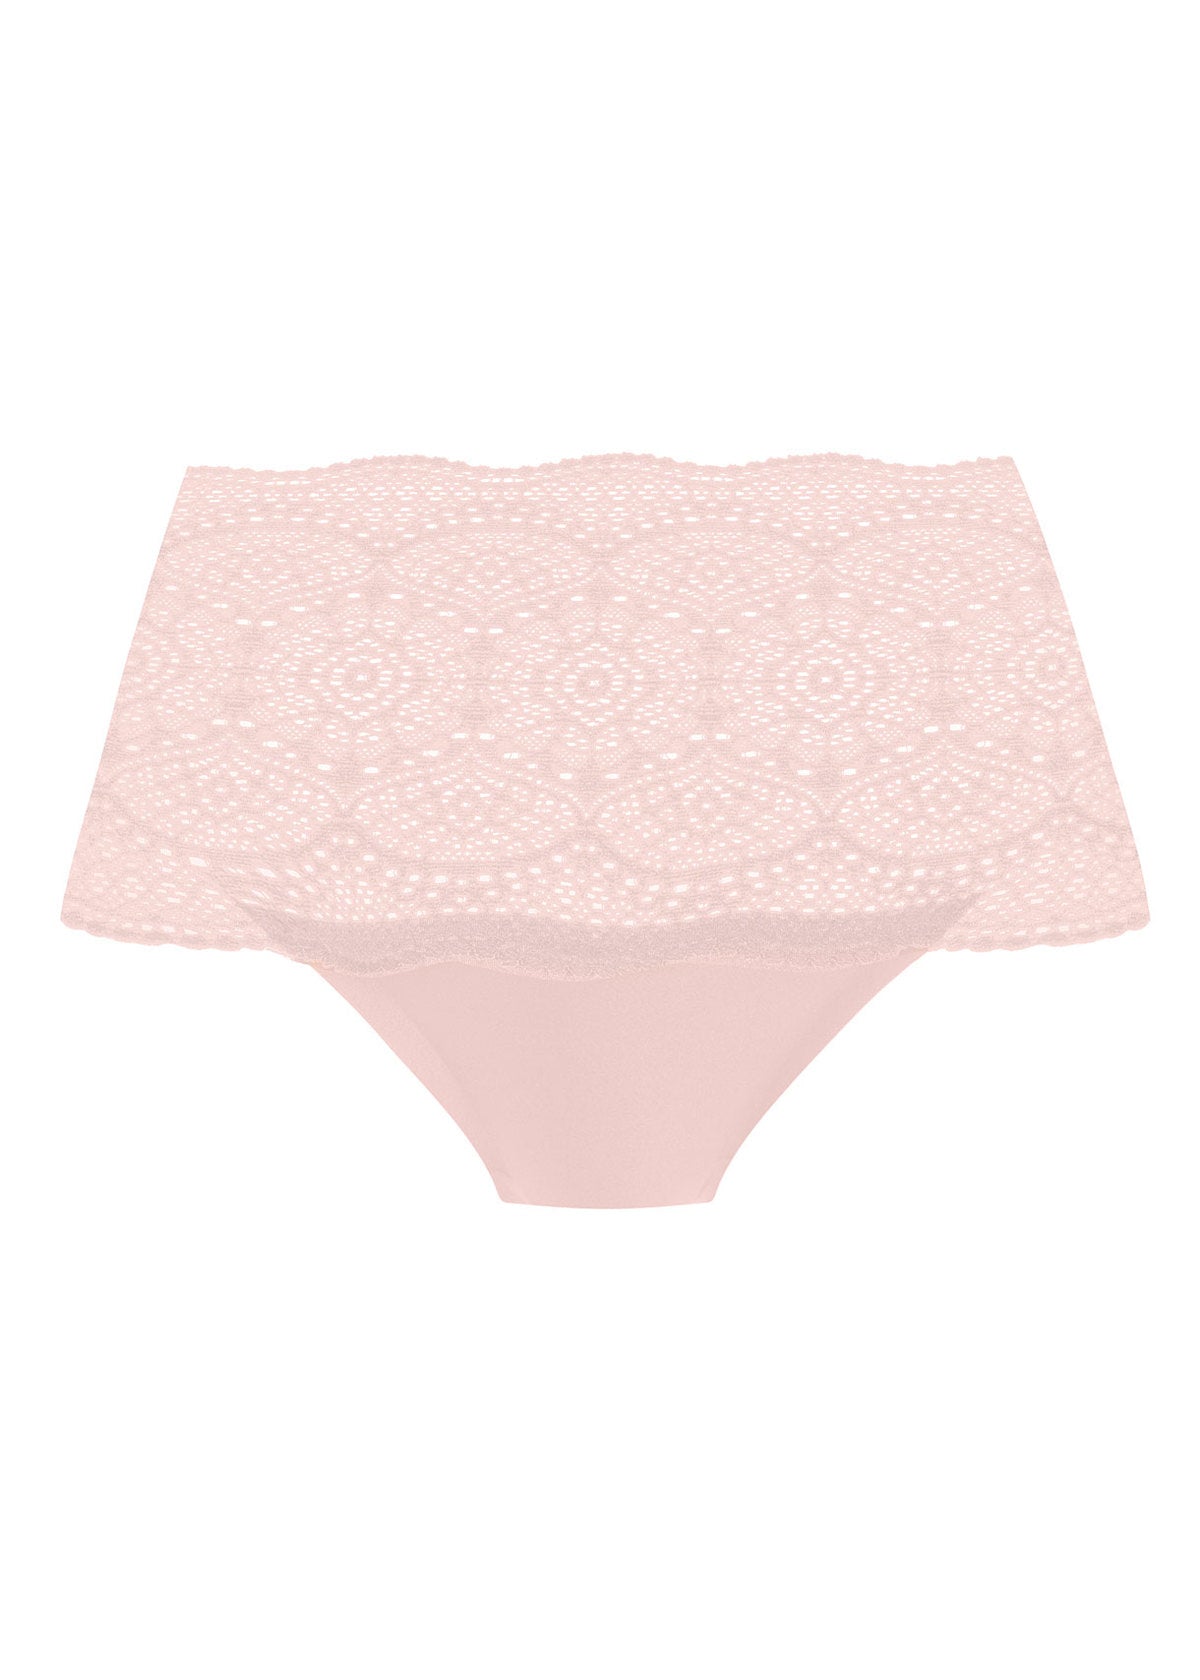 Lace Ease Invisible Stretch Full Brief in Blush front view product image